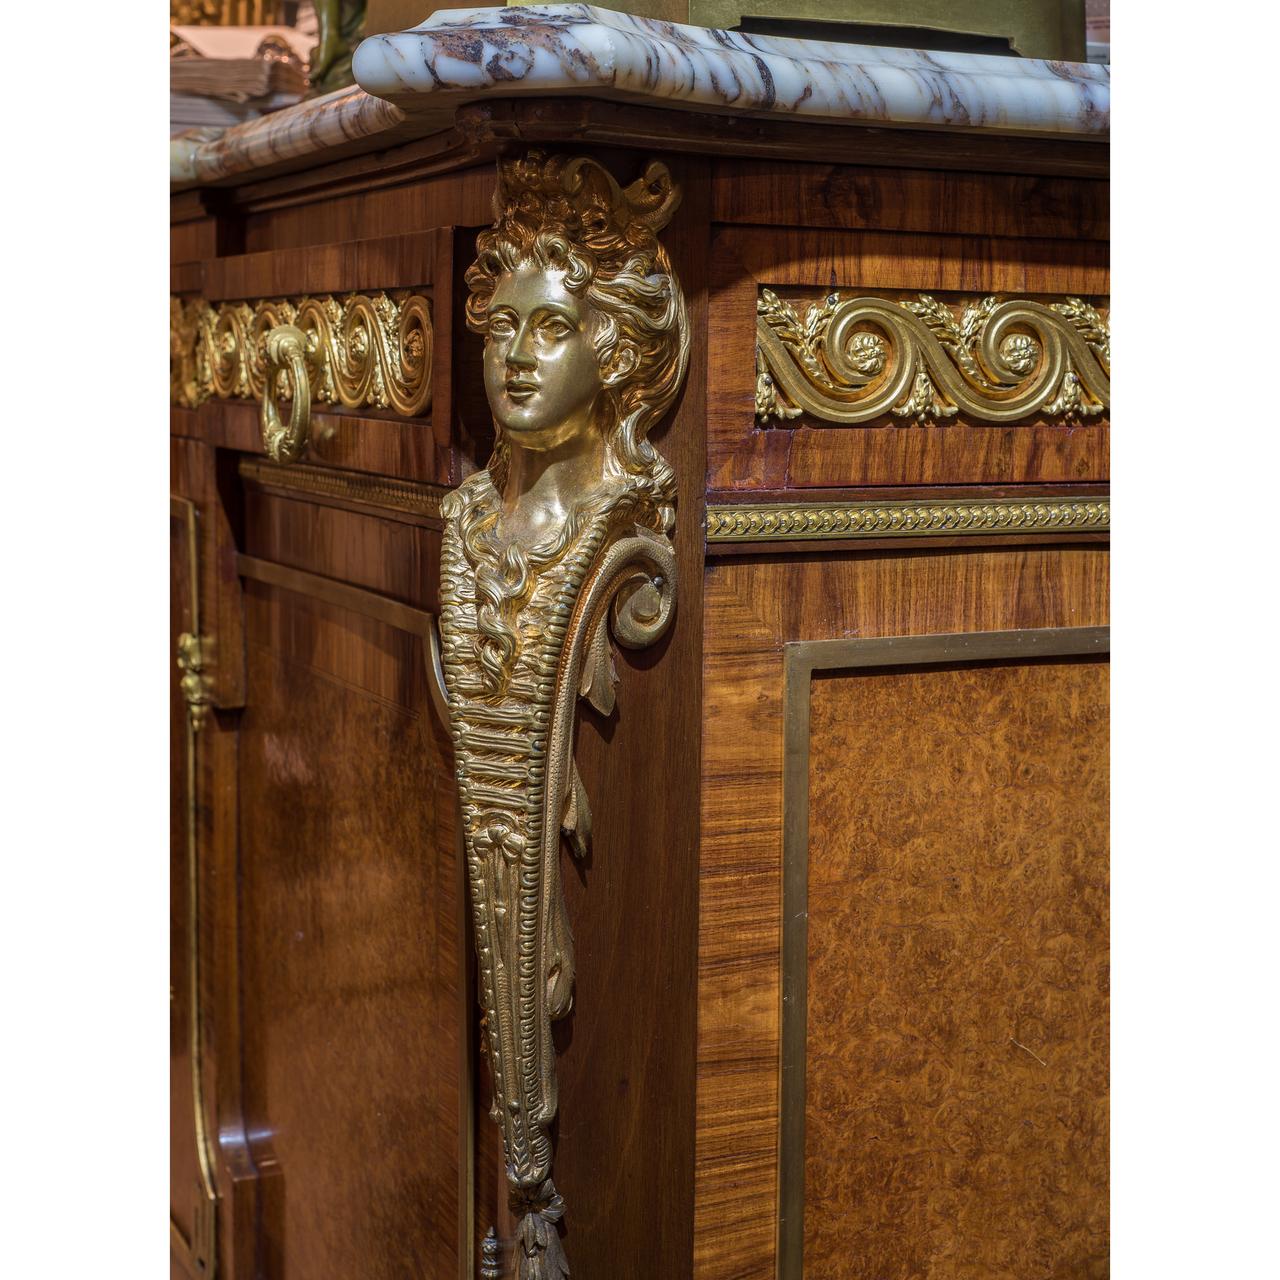 An Important 19th Century French Ormolu-Mounted Mahogany, Tulipwood and Amboyna Commode by François Linke
The villefranche de conflet marble top above a frieze set with three drawers with Vitruvian and foliate scrolls, over a cabinet with two